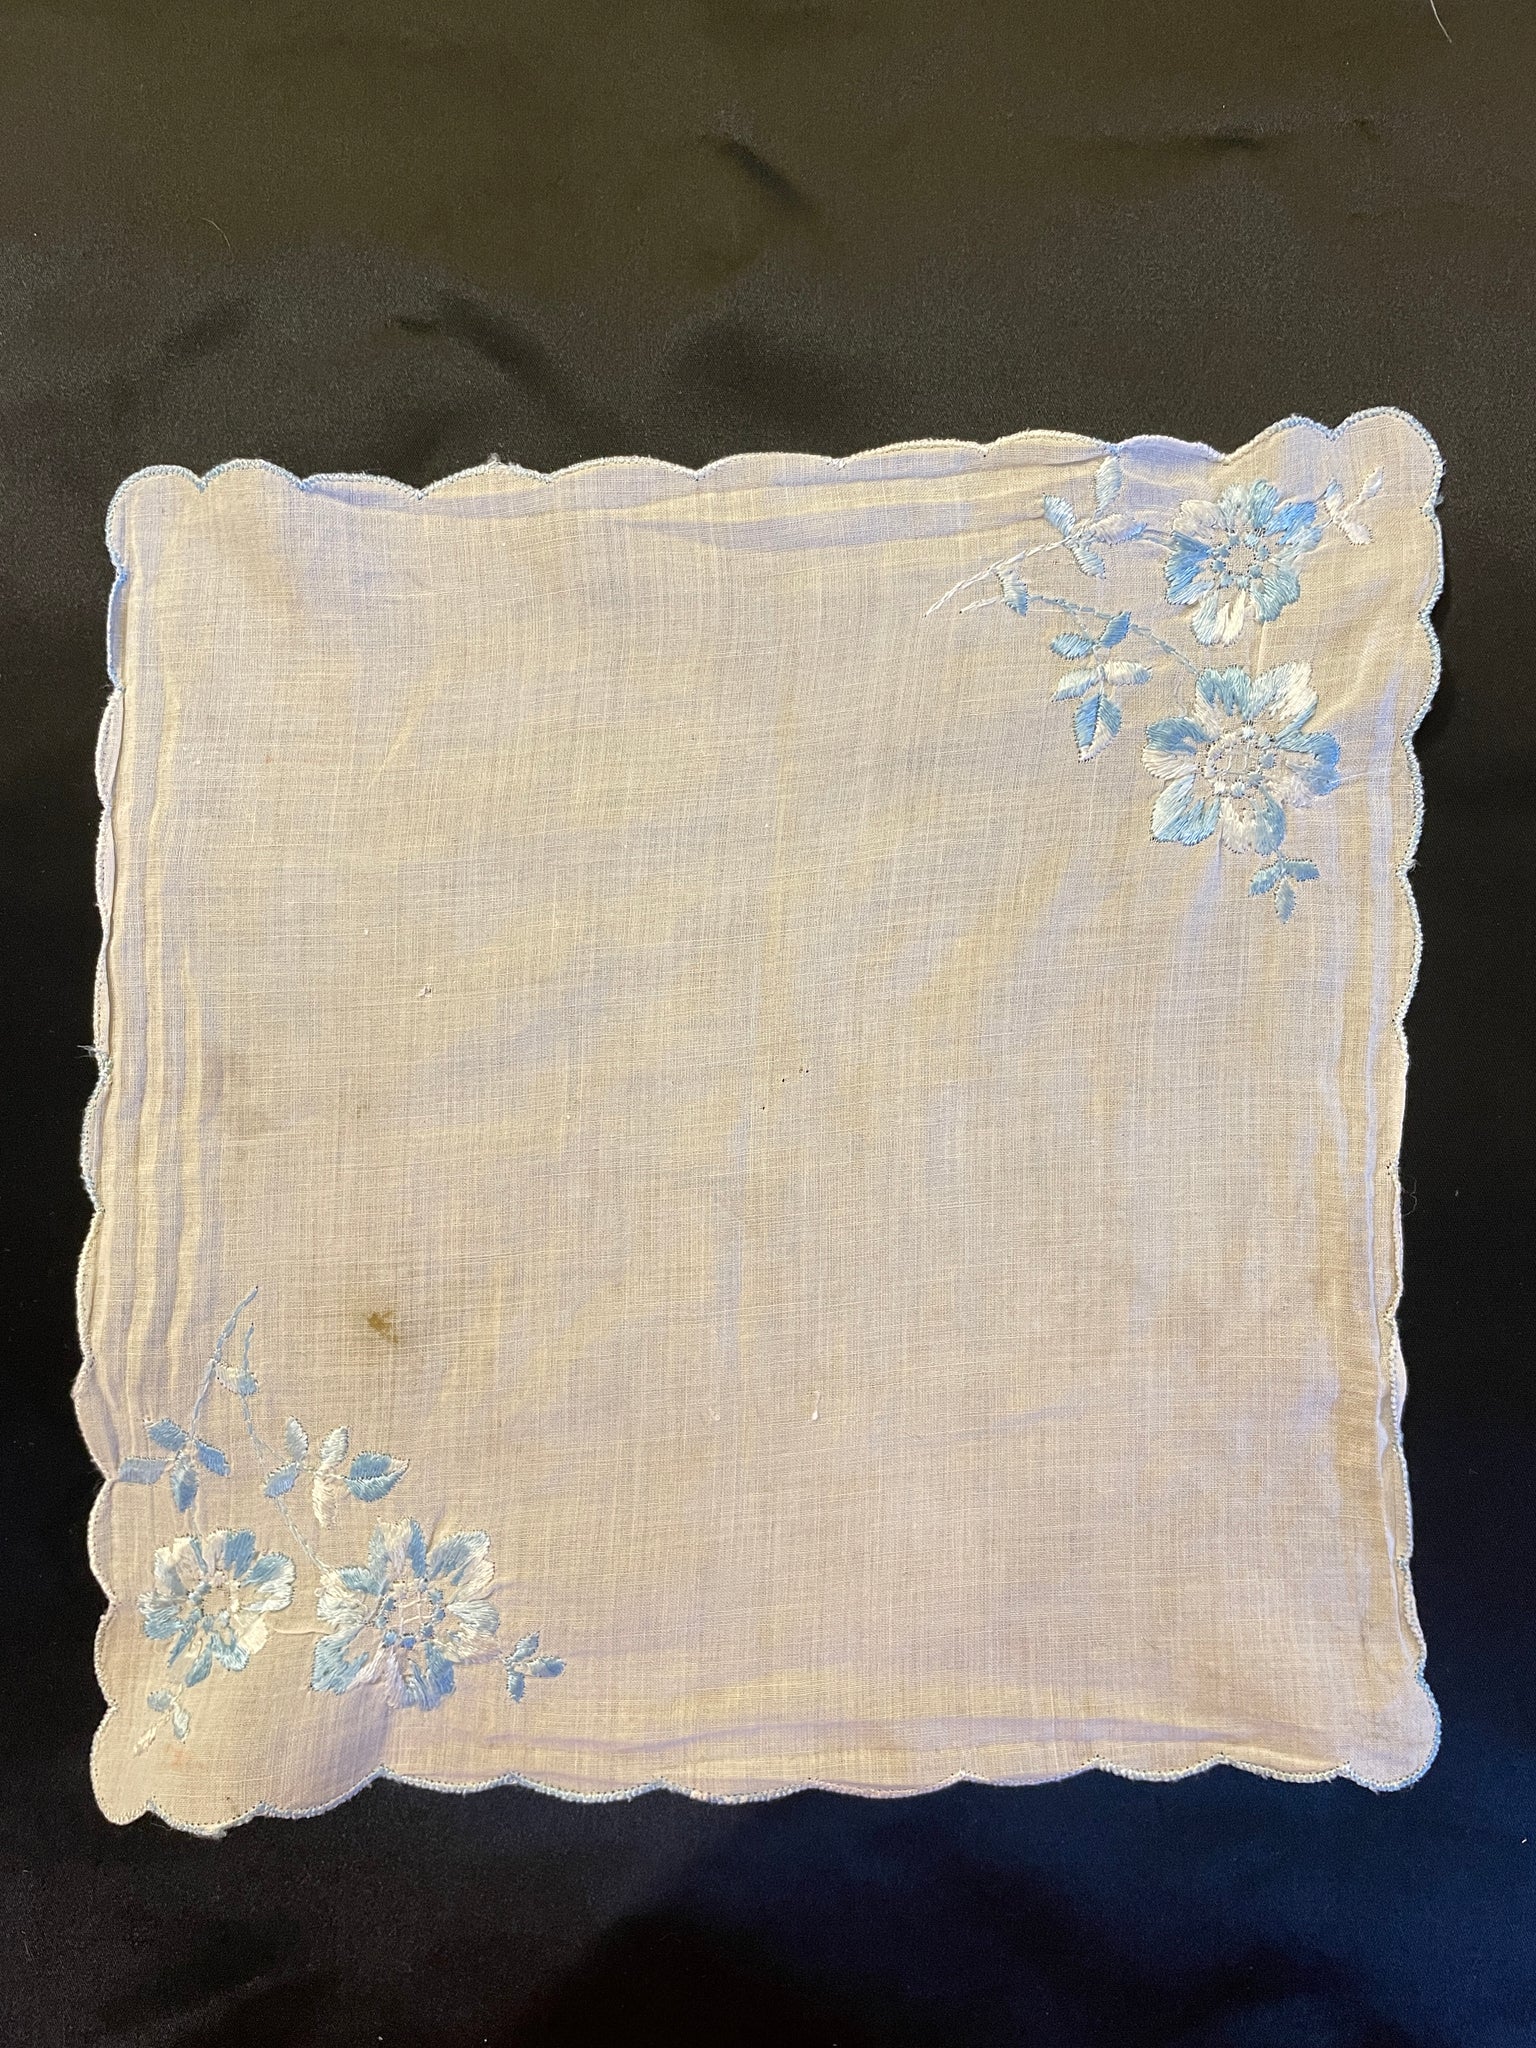 SALE Handkerchief Vintage Cotton Voile - White with Variegated Blue Embroidered